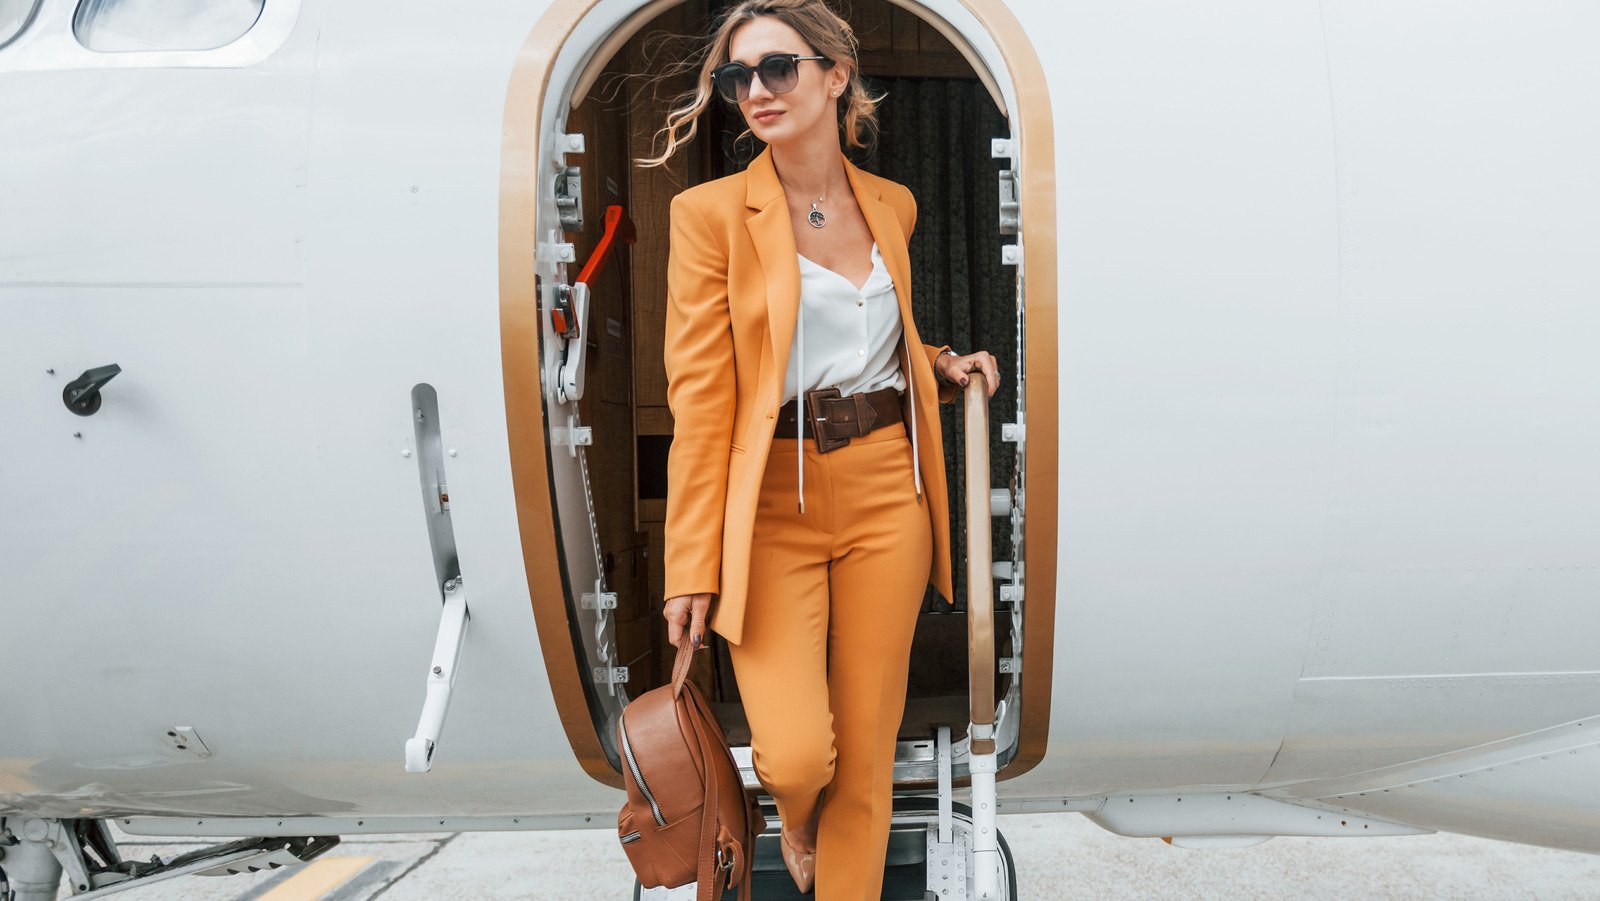 Clothing Items You Should Avoid Wearing On An Airplane  